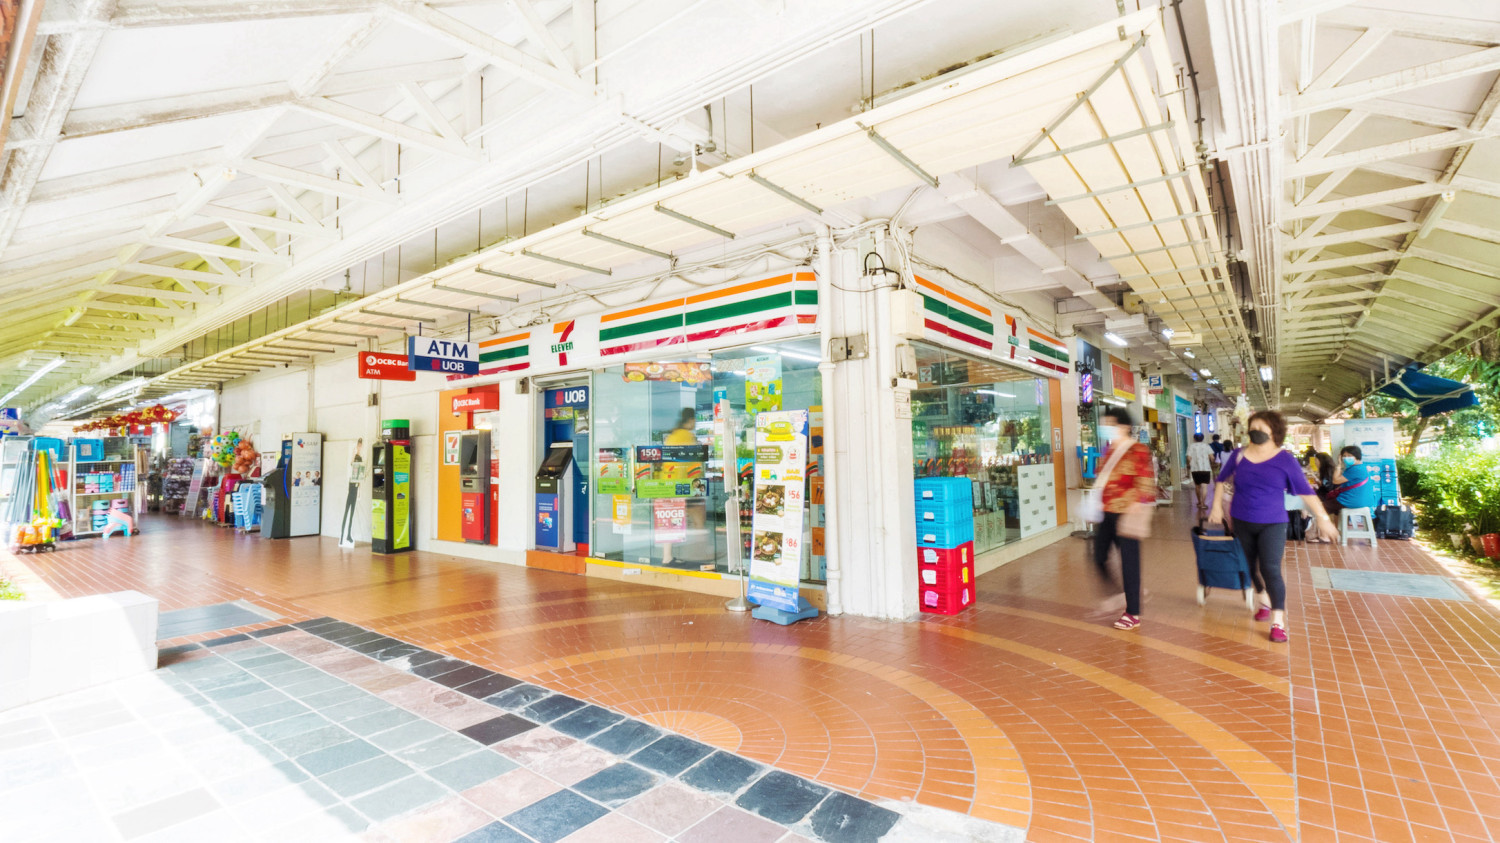 [UPDATE] Investor consortium lists portfolio of 11 HDB shops and a retail unit at Peninsula Plaza for sale at $52.2 mil - Property News